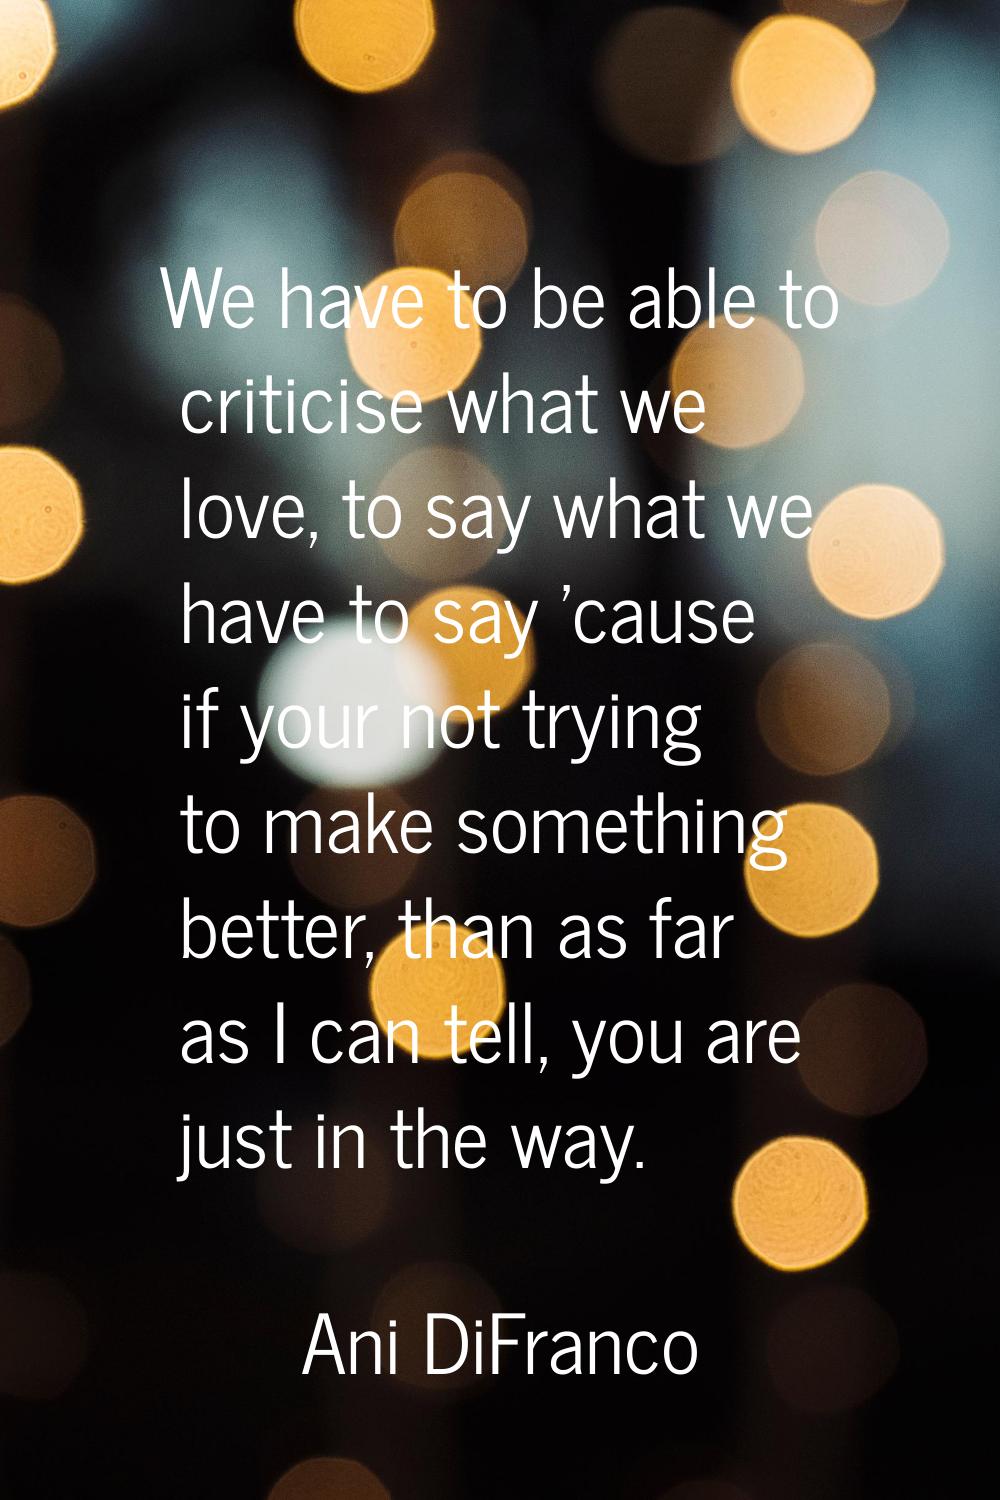 We have to be able to criticise what we love, to say what we have to say 'cause if your not trying 